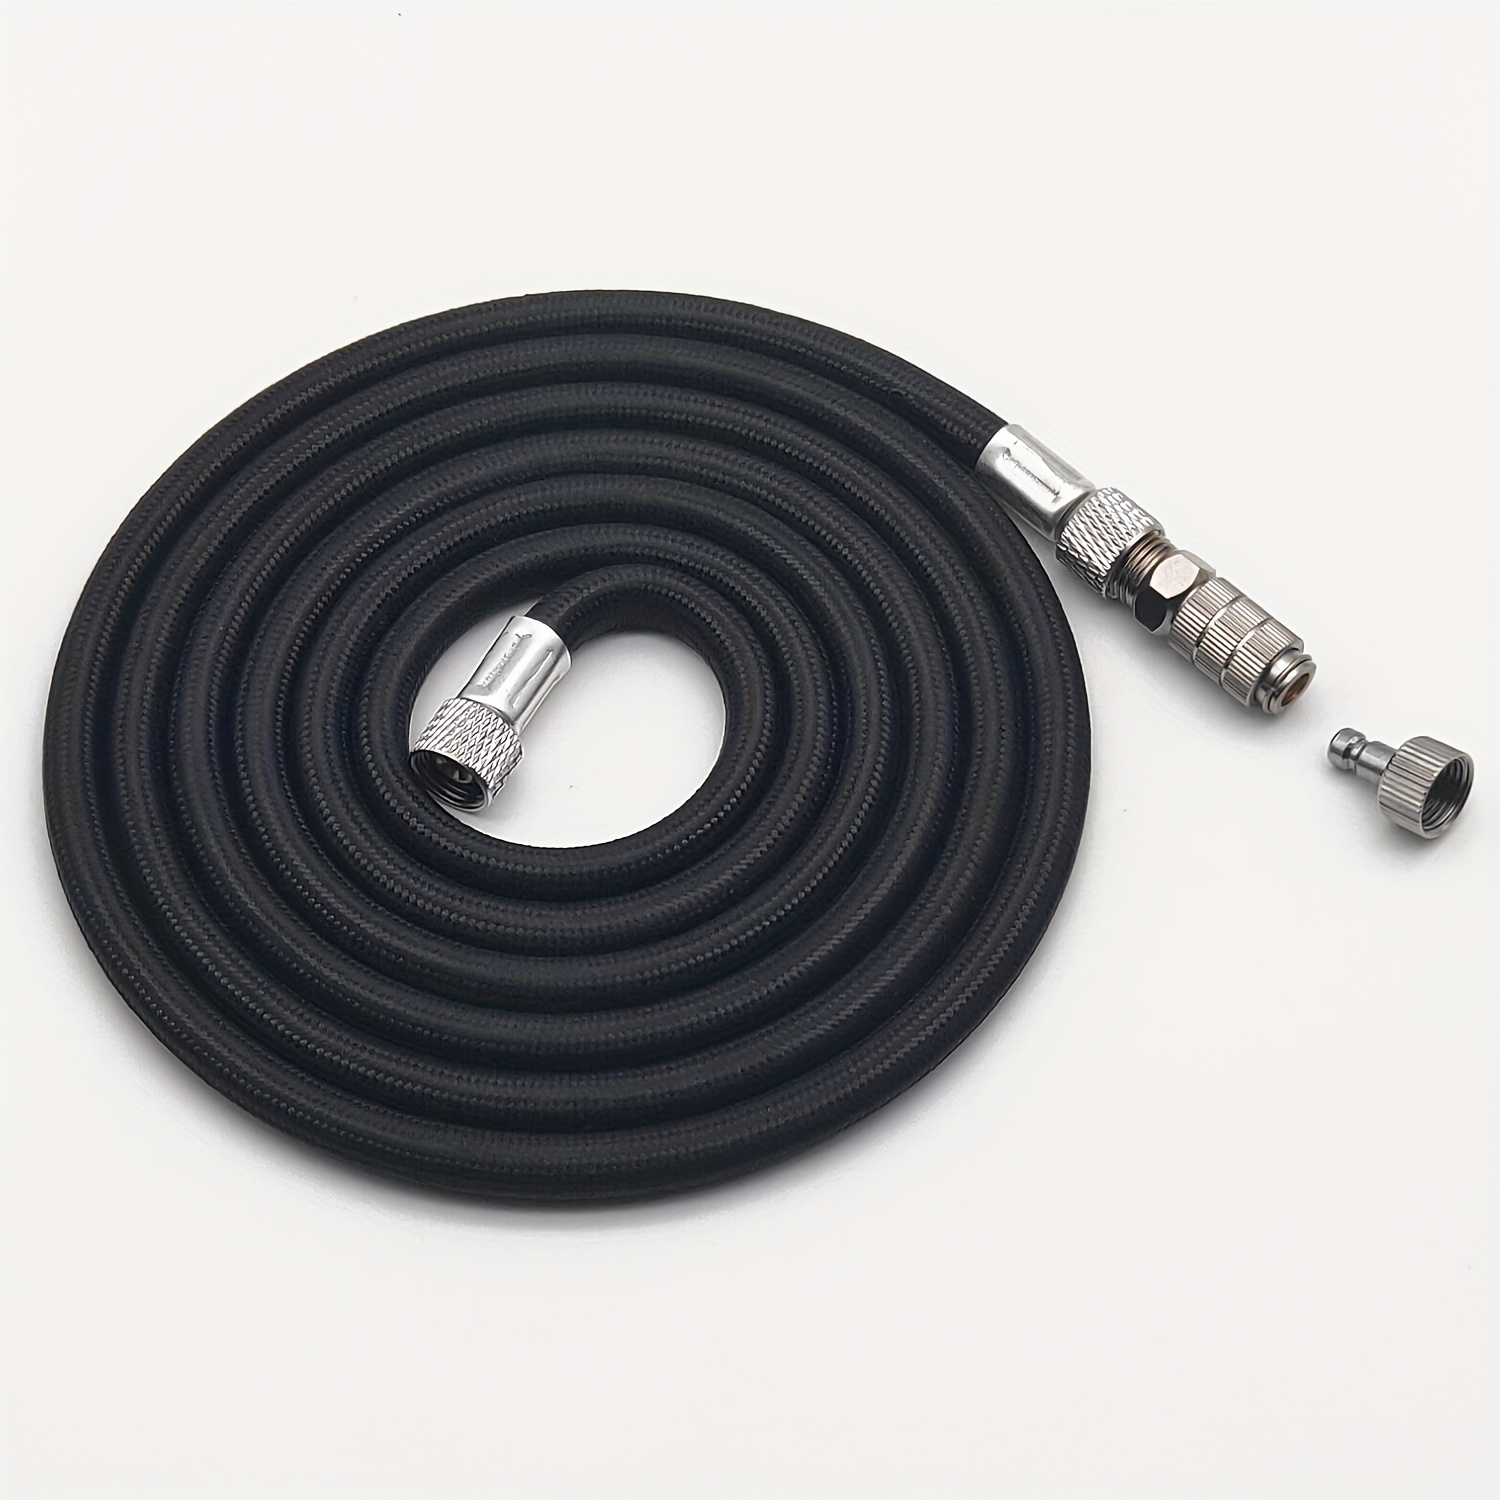 Airbrush Hose 6' Nylon Braided Air Hose With Bsp Male And Female